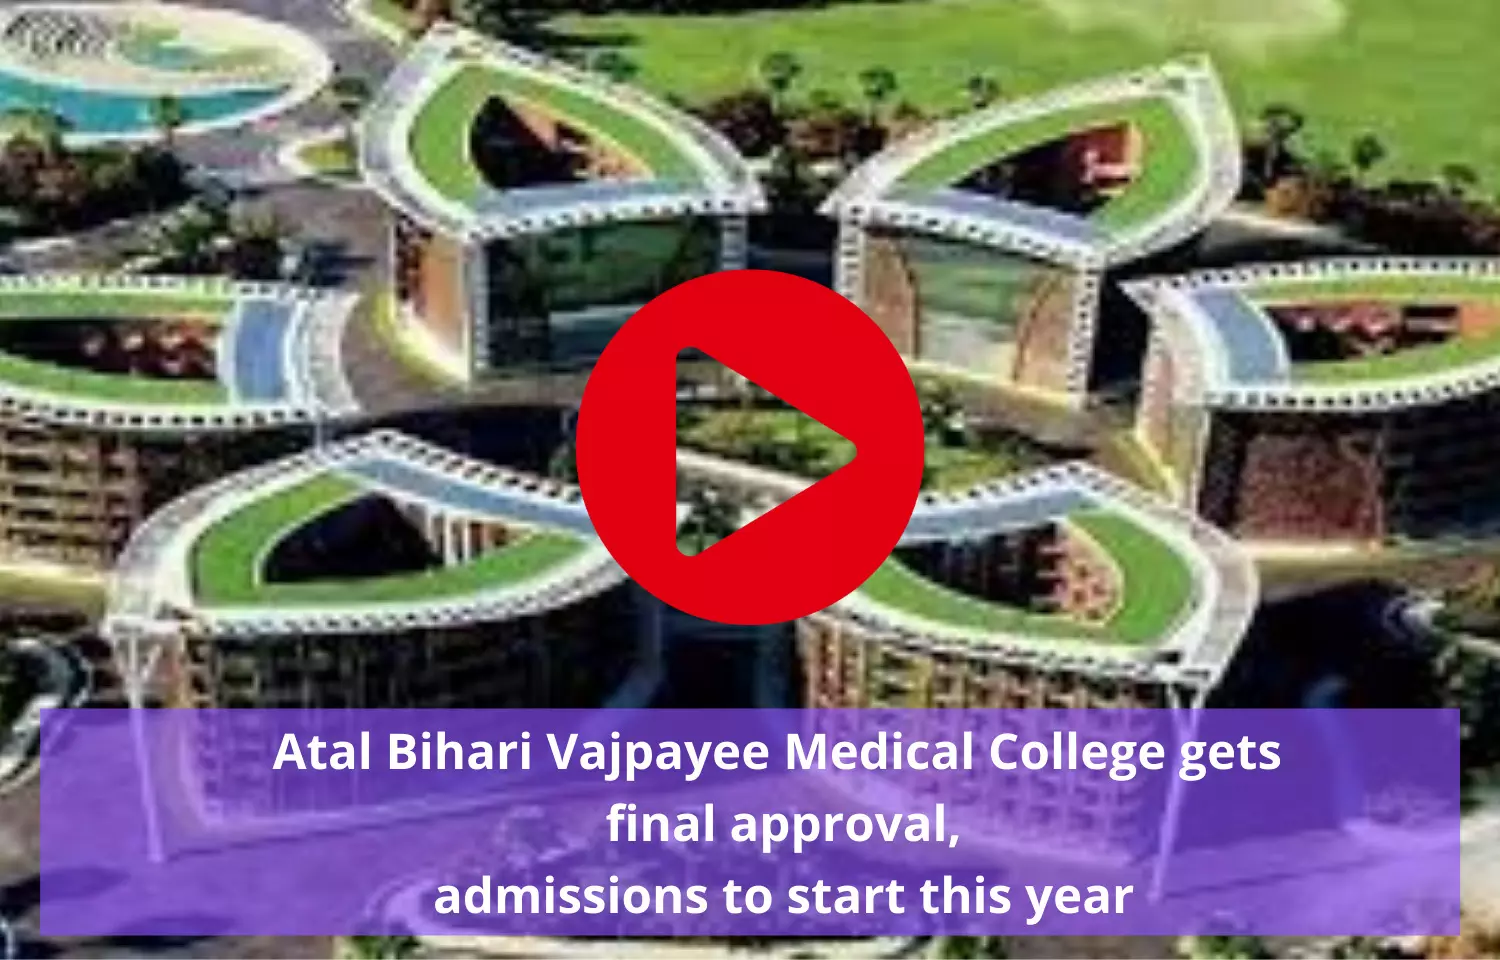 Atal Bihari Vajpayee Medical College gets final approval, admissions to start